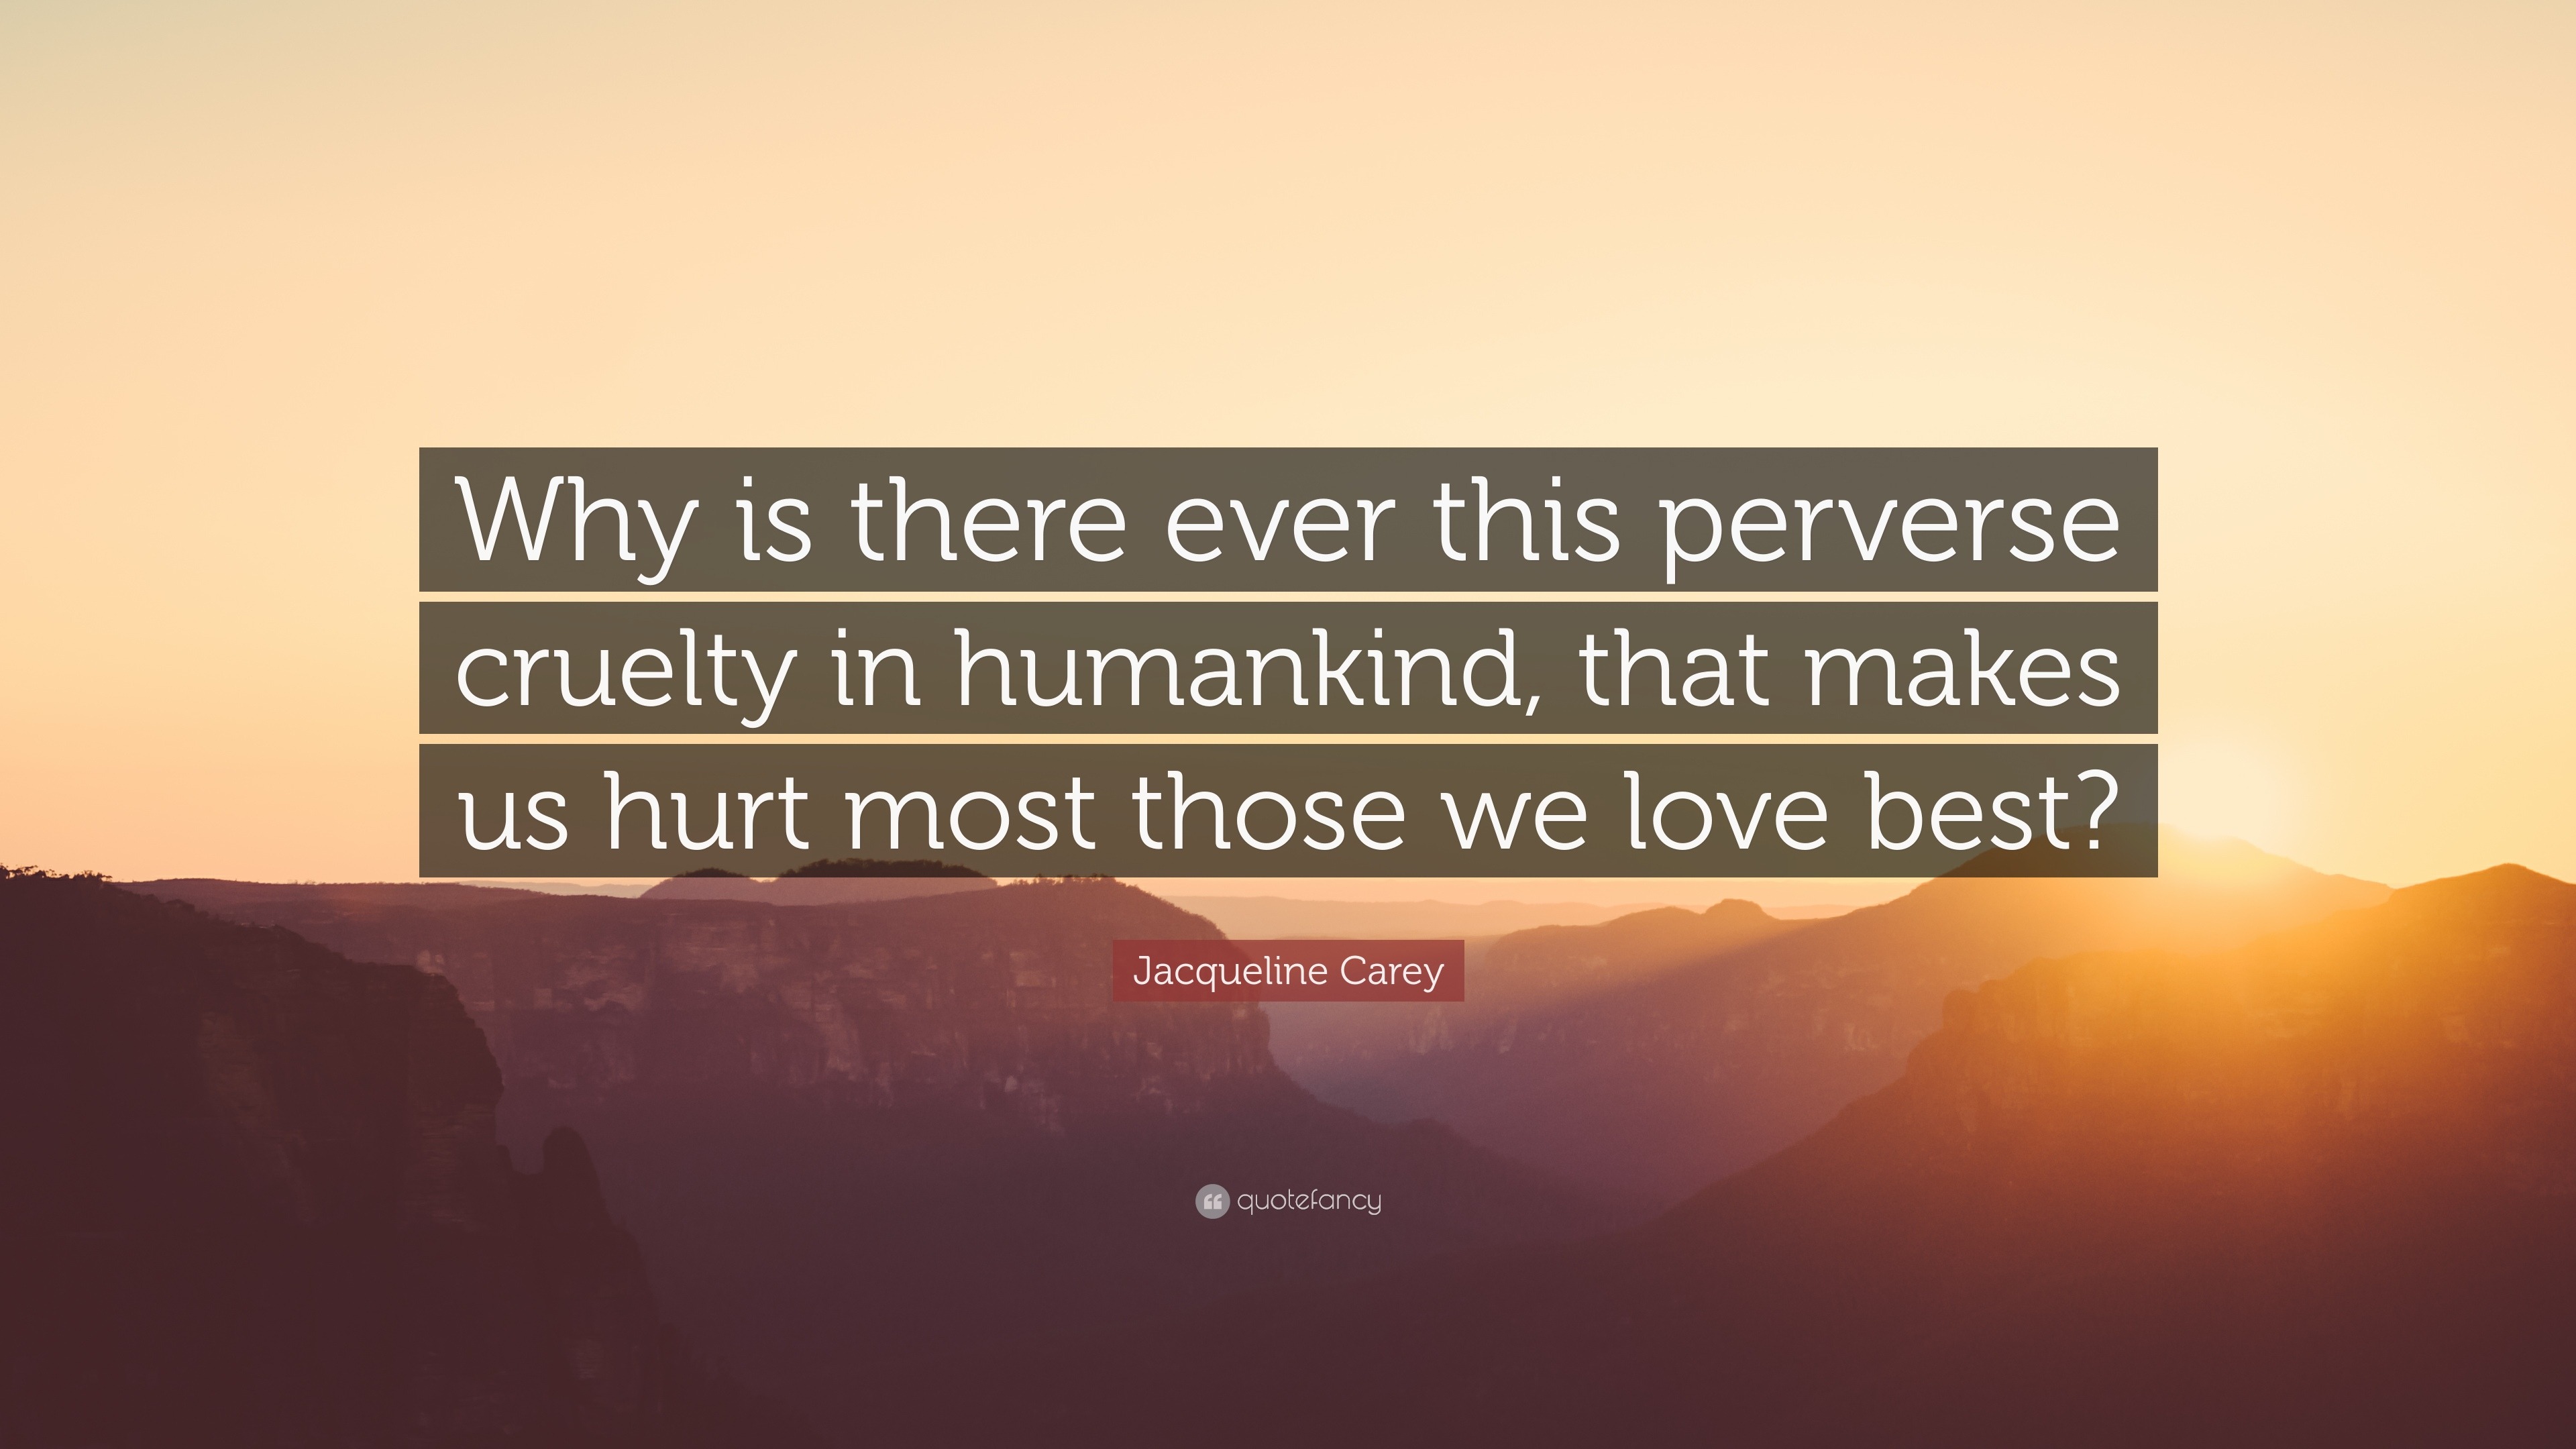 Jacqueline Carey Quote “Why is there ever this perverse cruelty in humankind that